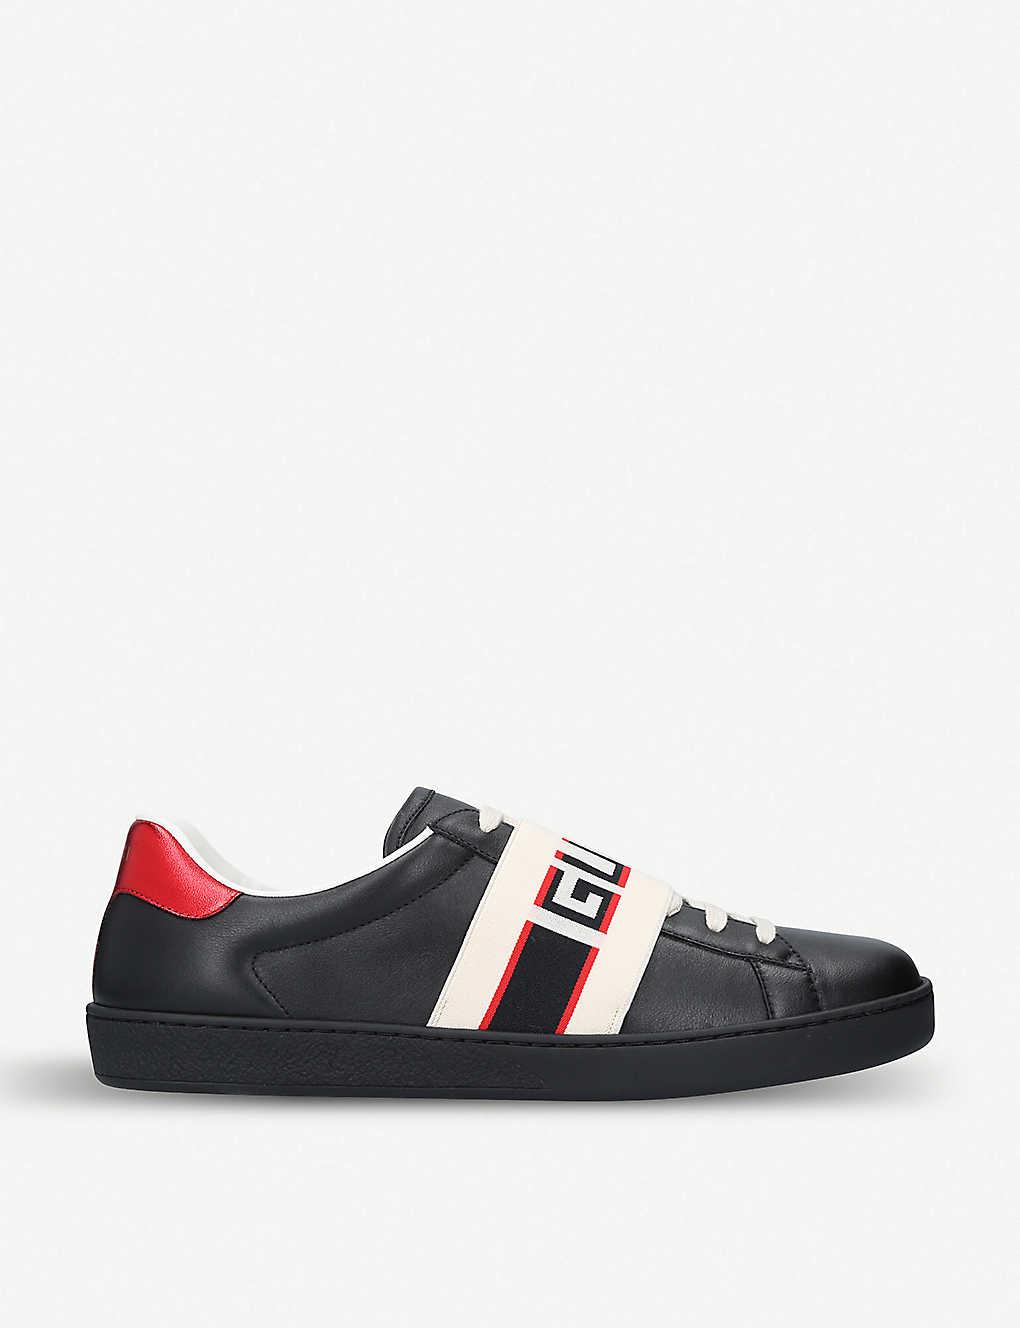 gucci shoes black and red